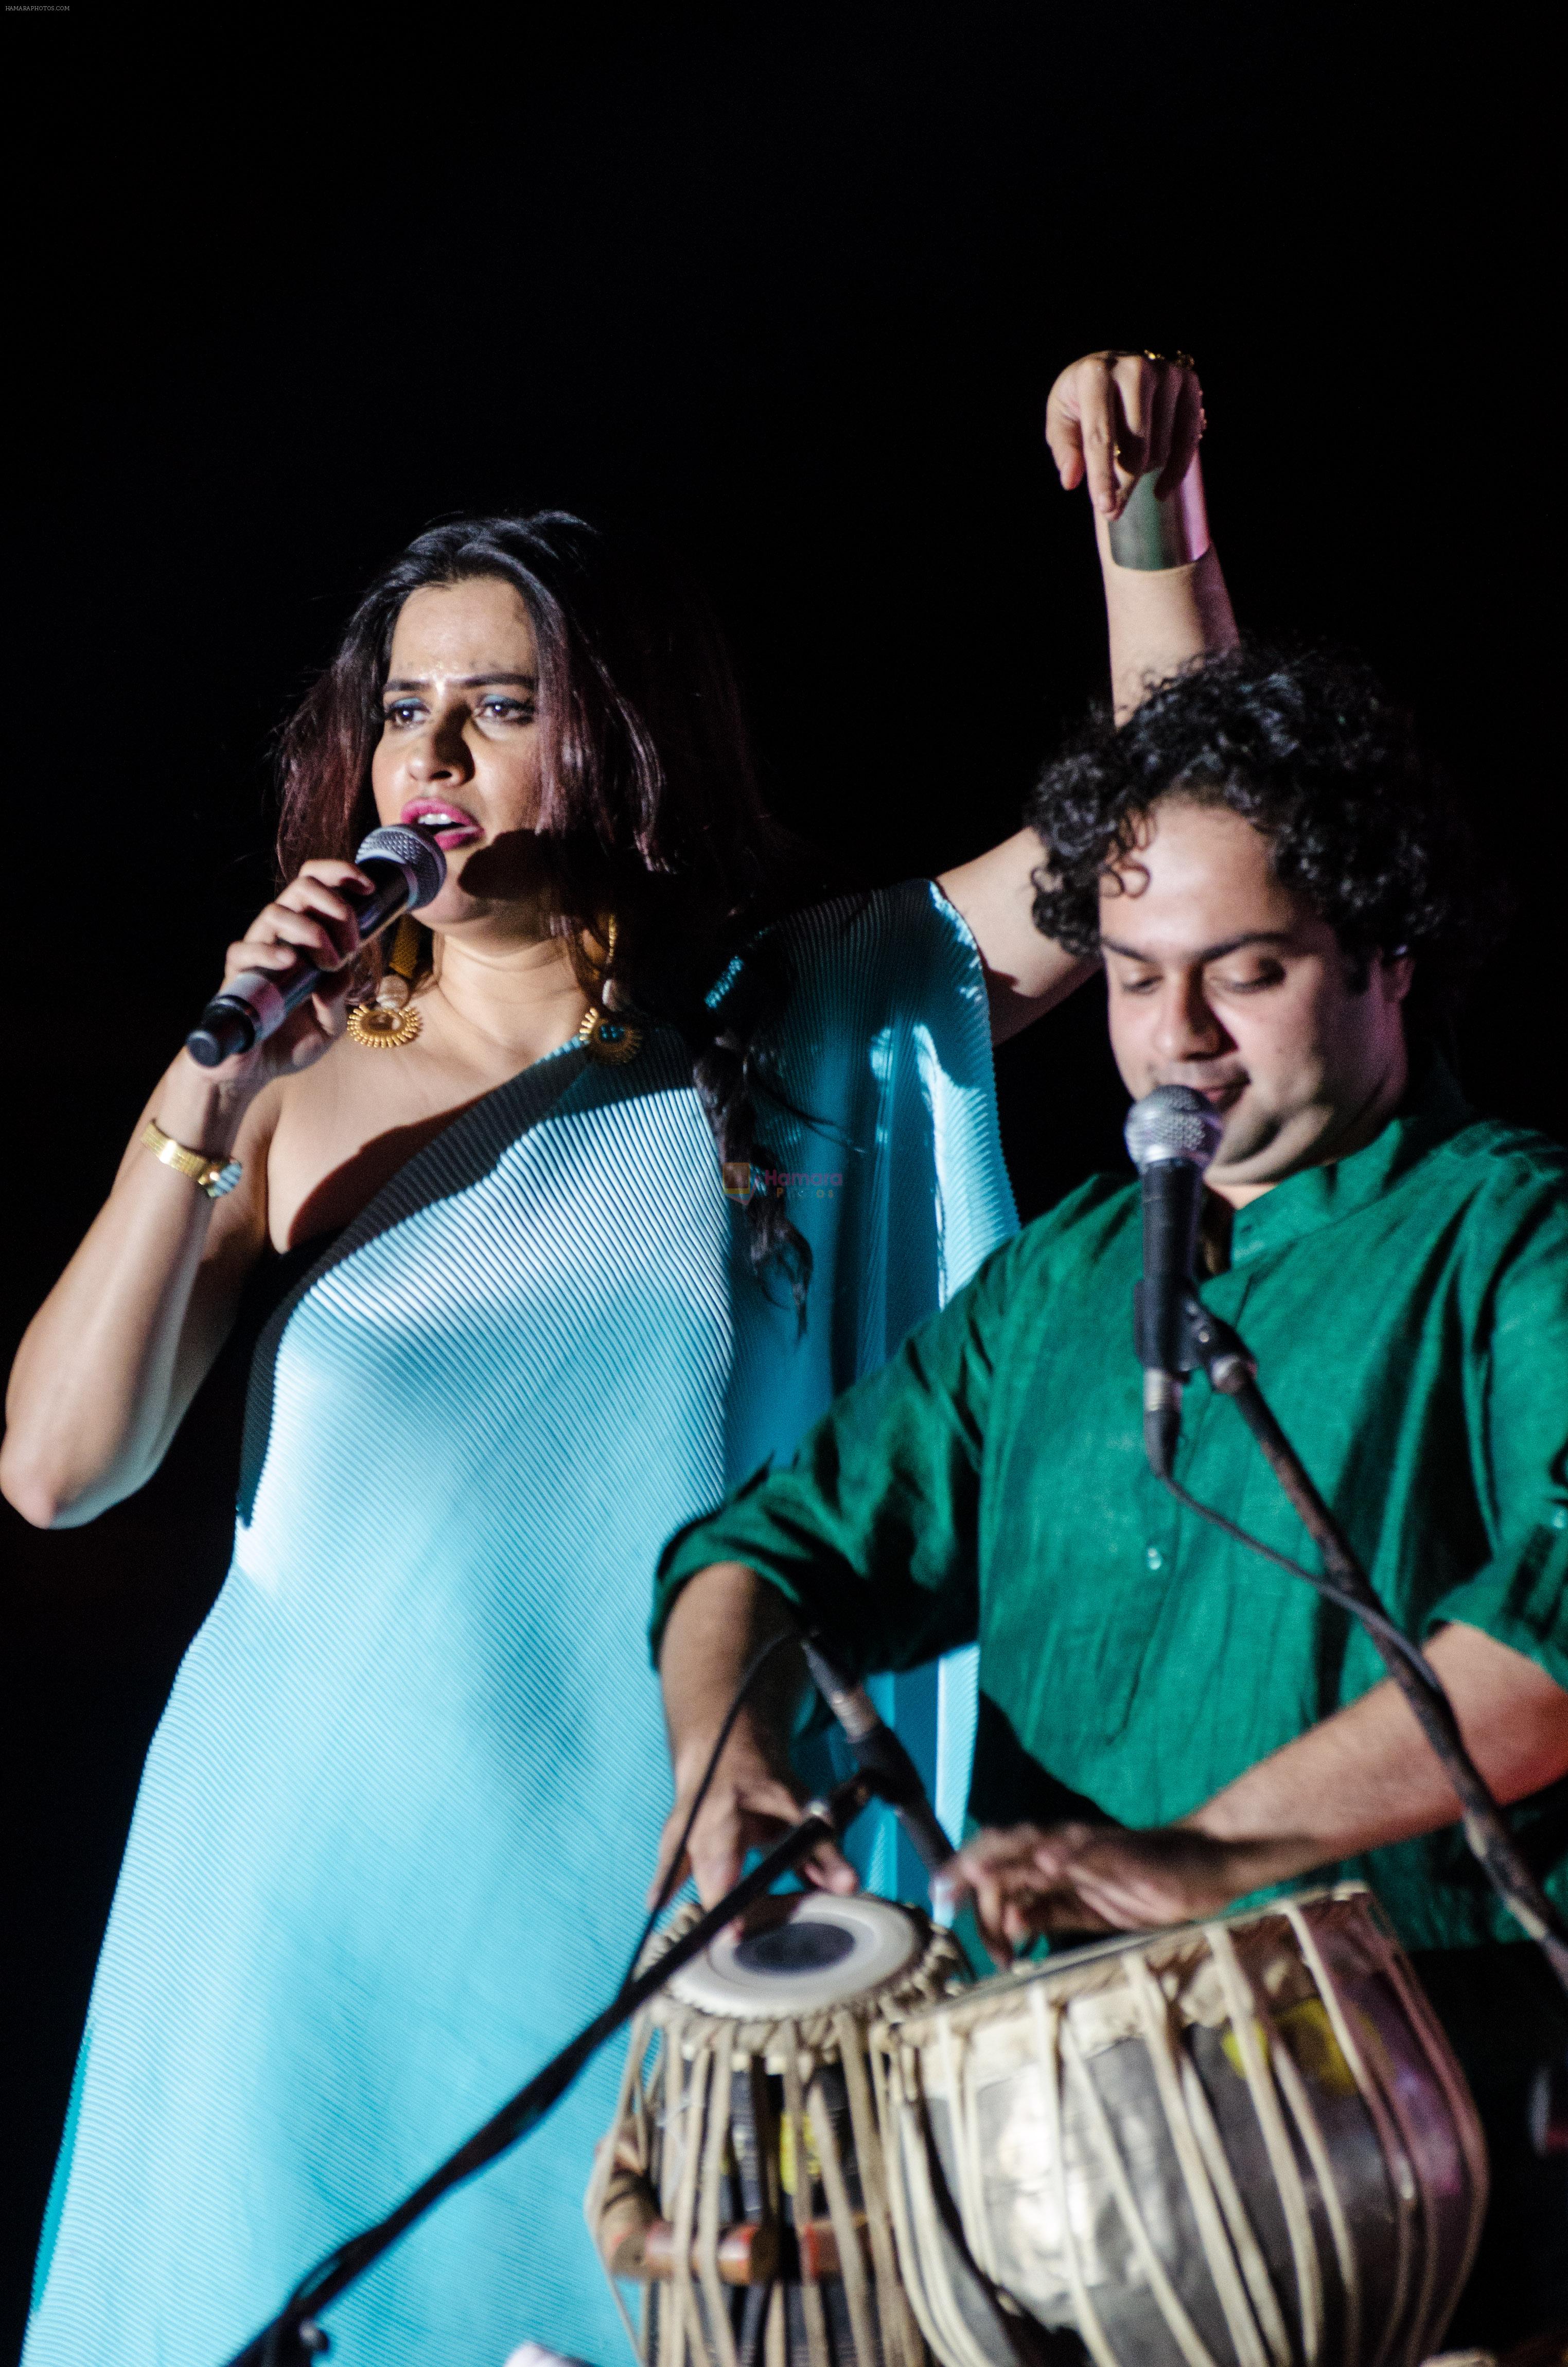 Sona Mohapatra's Concert at the TMTC grounds in Hyderabad on 26th Feb 2016